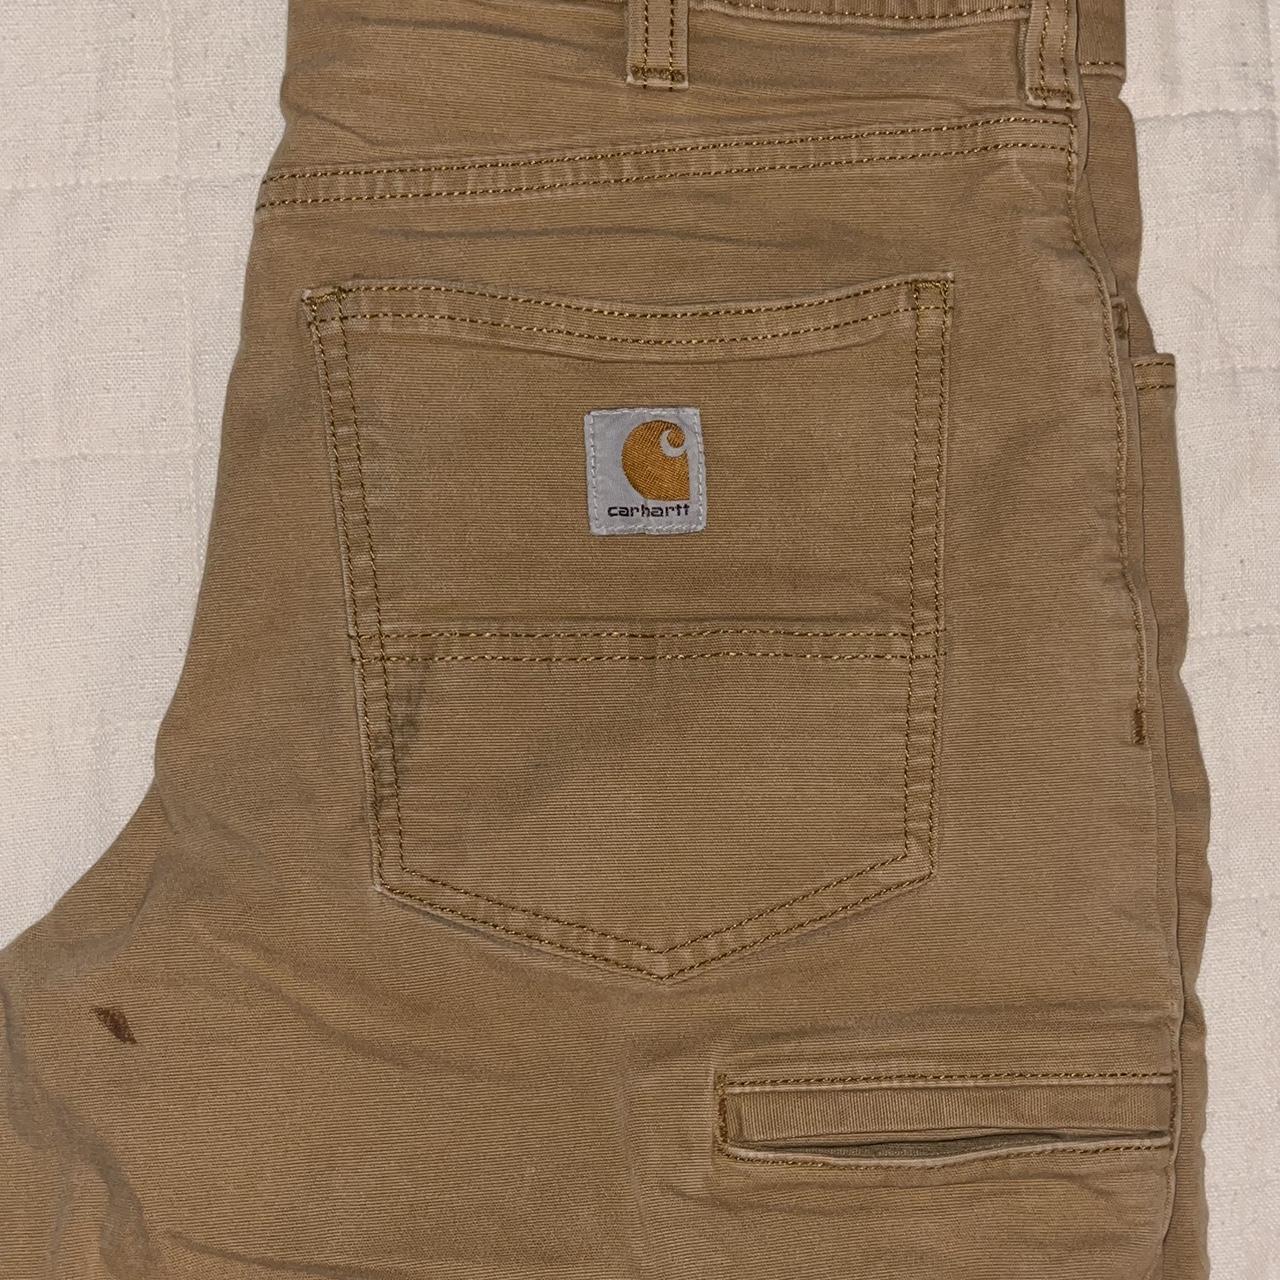 relaxed fit Carhartt camel color work pants - 32x32.... - Depop